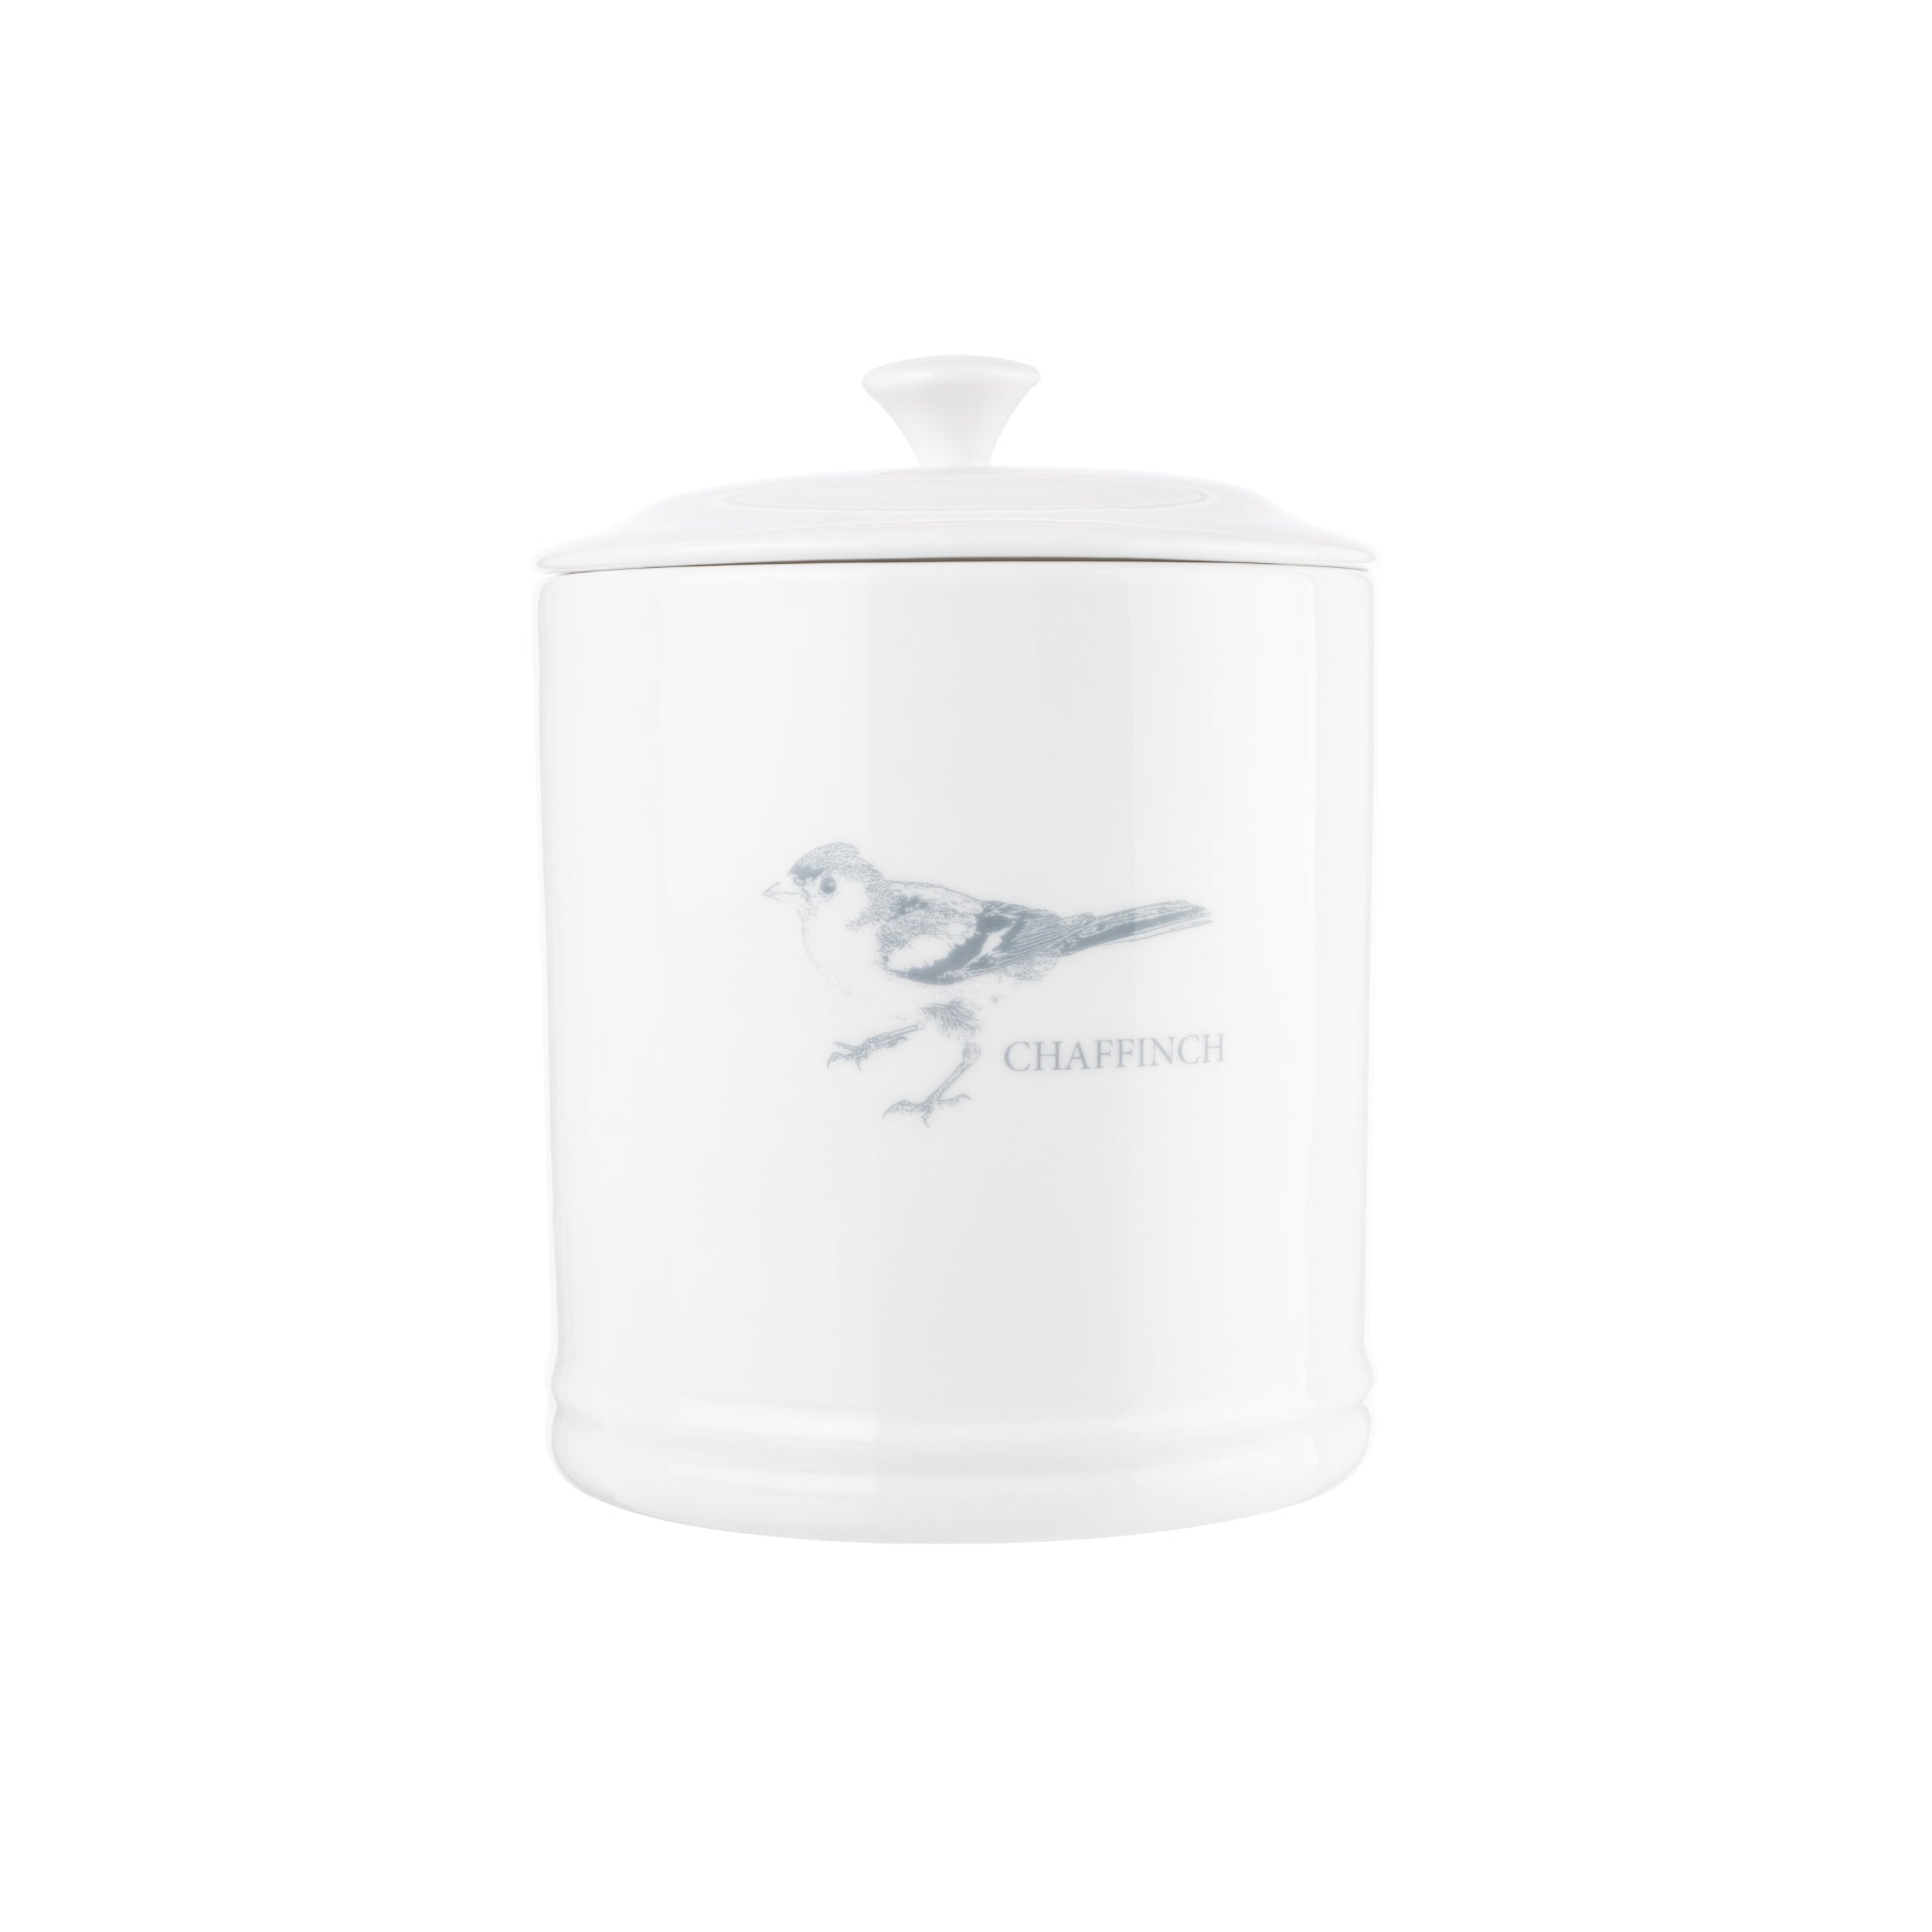 MARY BERRY ENGLISH GARDEN STORAGE CANISTER | CHAFFINCH